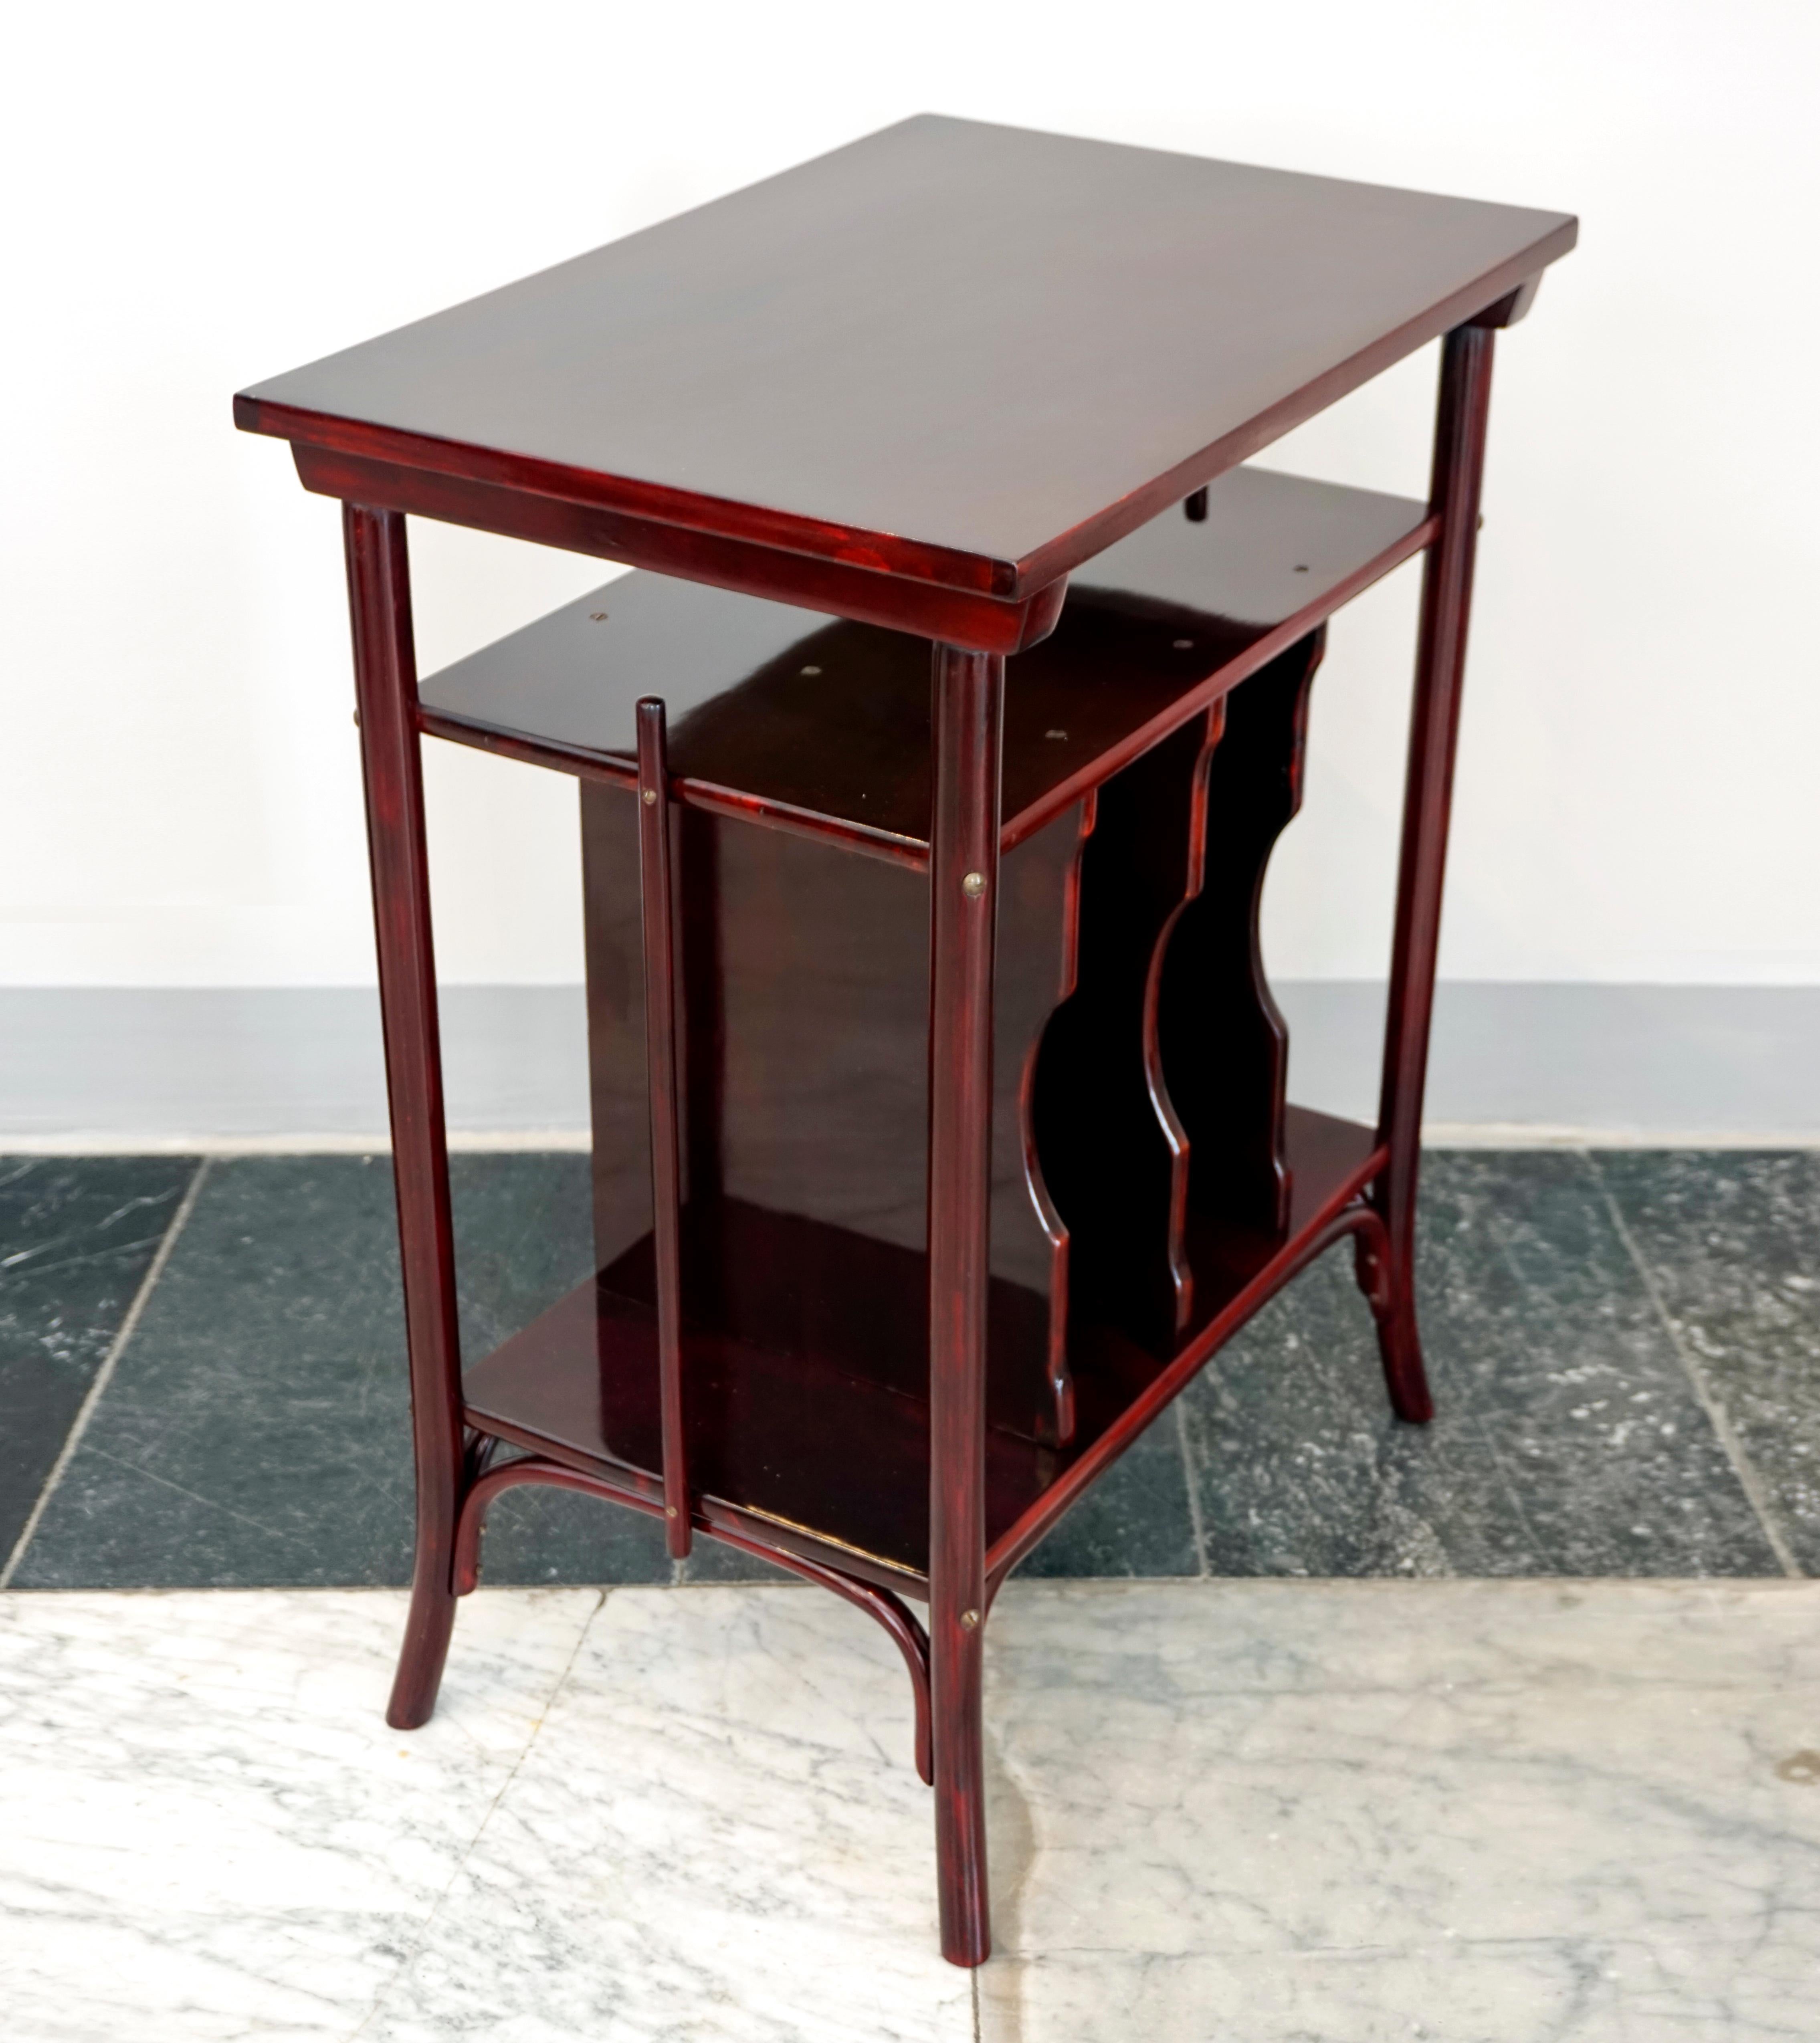 Small table with elegantly curved legs, one horizontal and four vertical slots for notes and newspapers.
Shapely furniture made by hand in high-quality with bentwood elements, beech, stained mahogany, shellac hand-polished. 

Manufactured by THONET